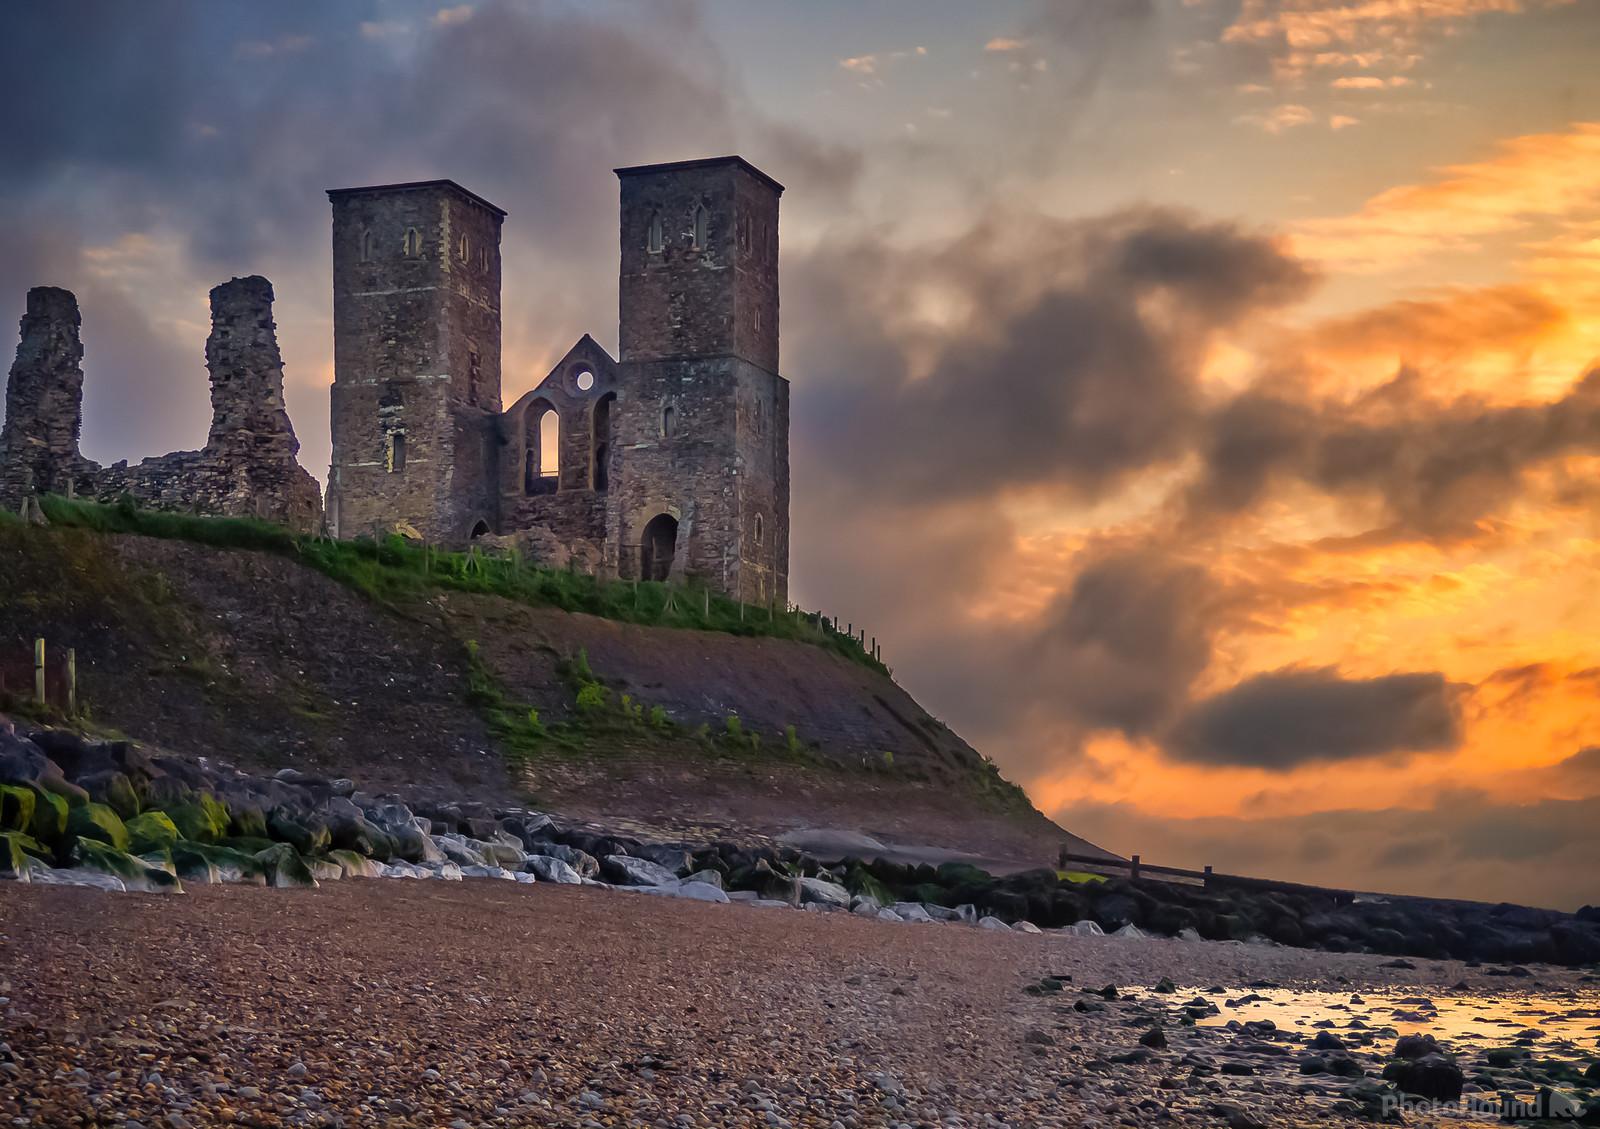 Image of Reculver Towers by Jo Whitnell